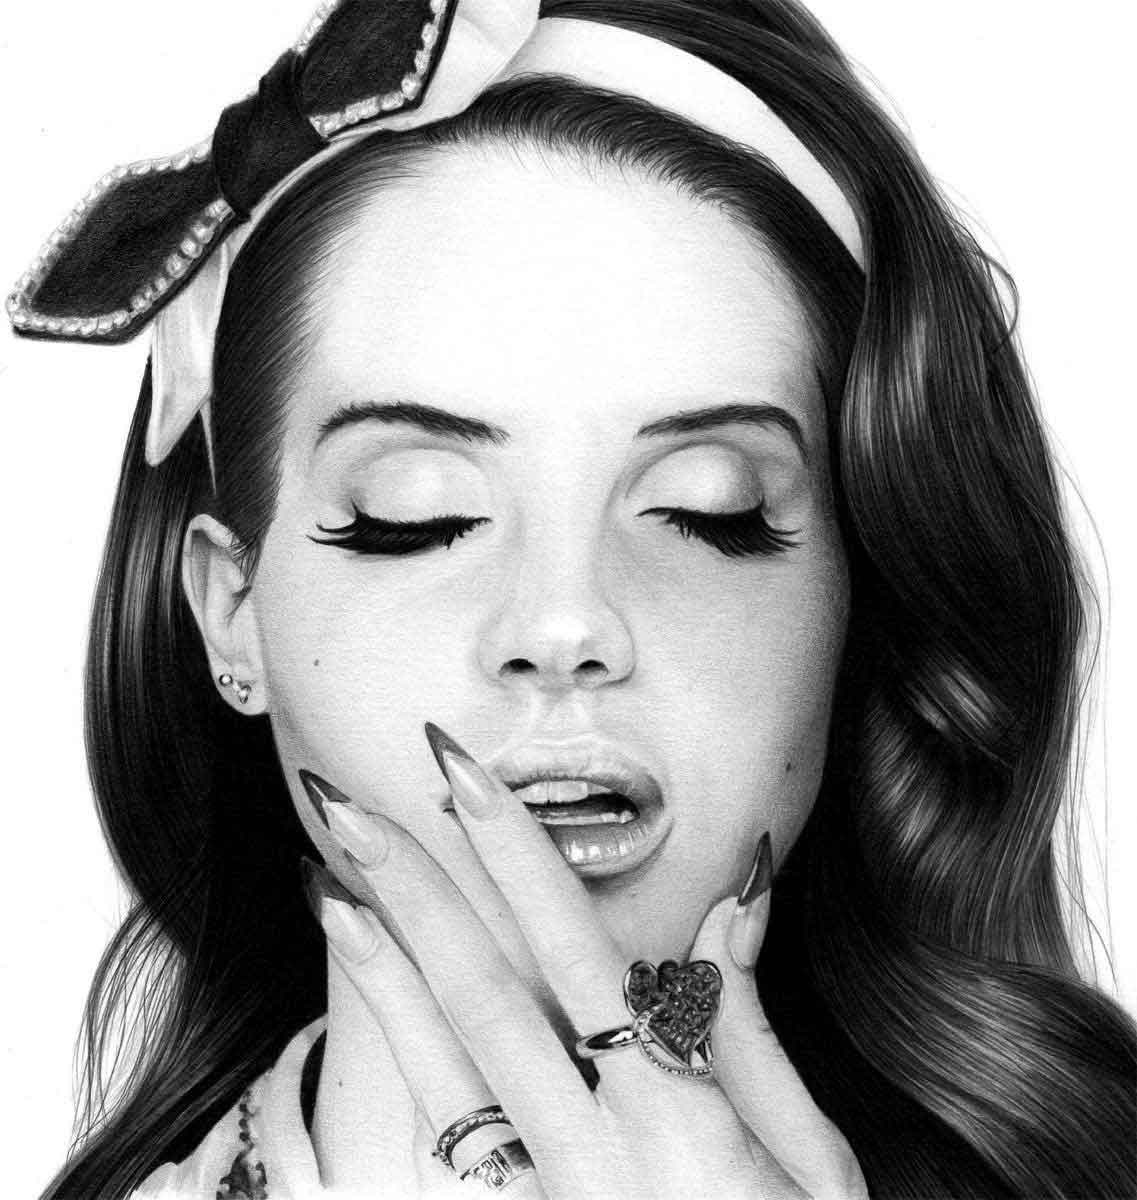 Realistic Pencil Drawing of Singer Lana Del Rey, by Artist Sophie Lawson